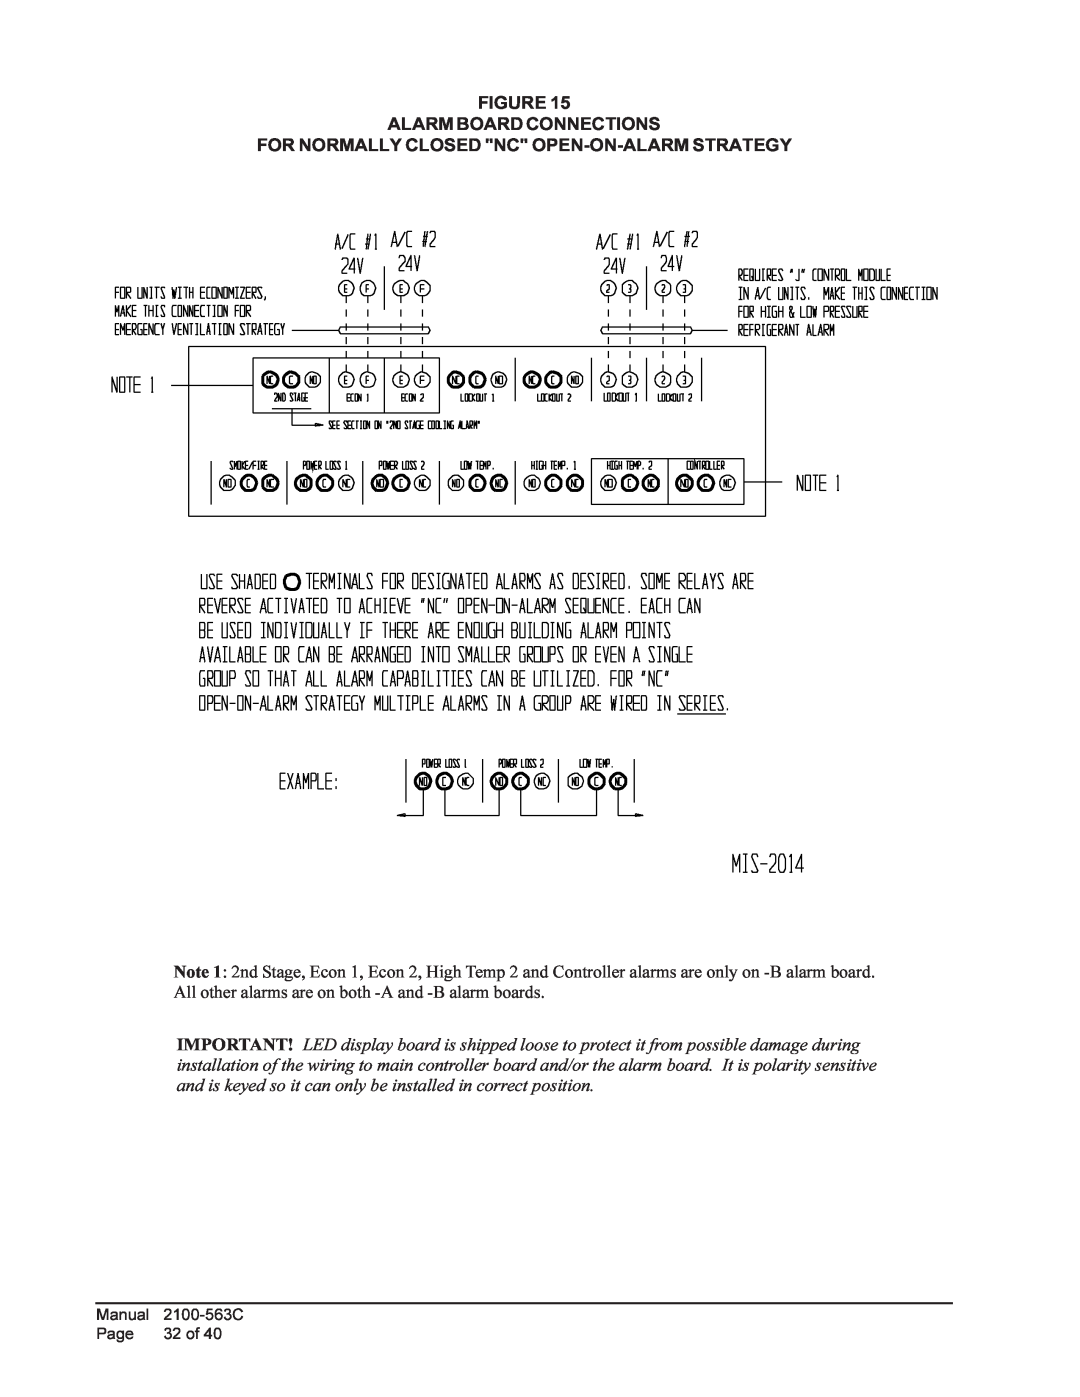 Bard MC4000 Figure Alarm Board Connections, For Normally Closed Nc Open-On-Alarmstrategy, Manual, Page, 32 of 